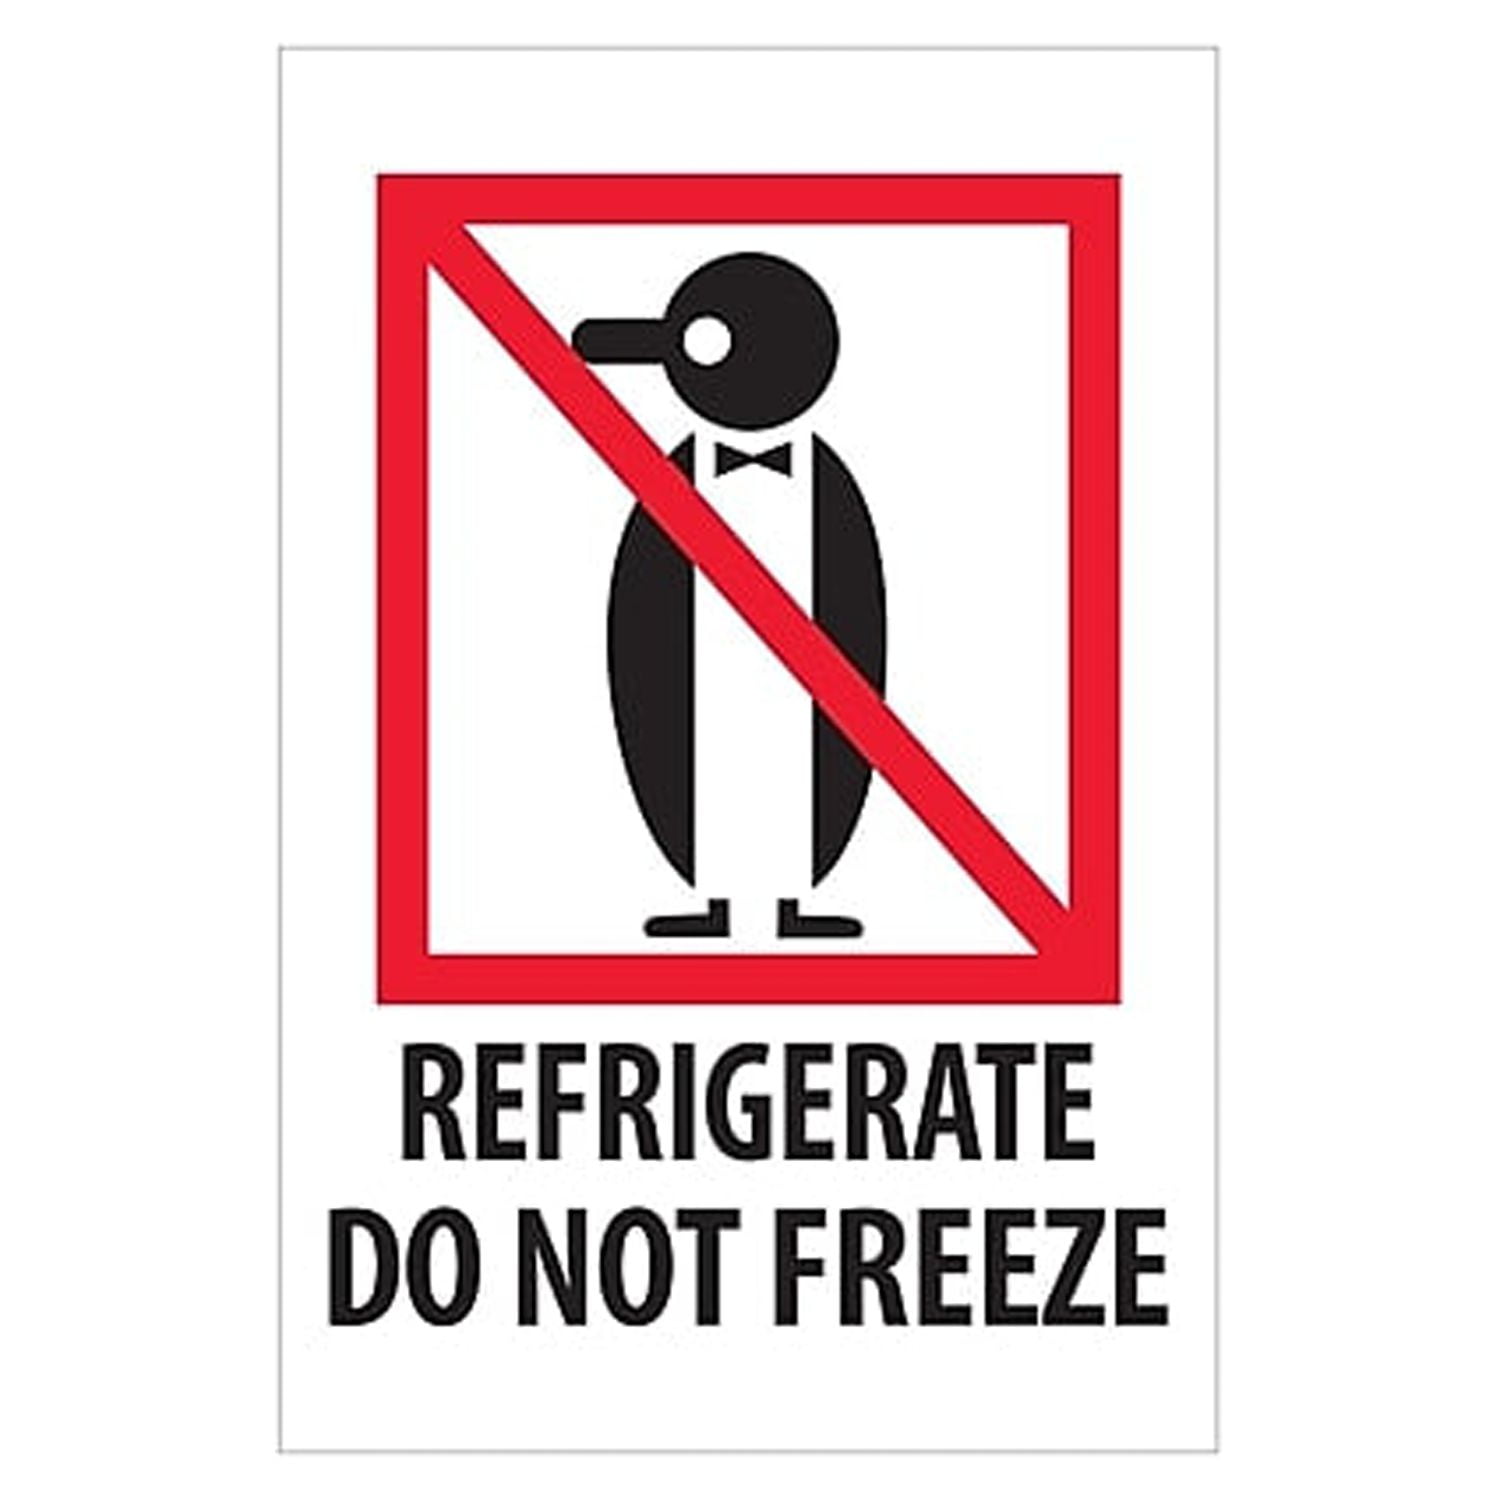 Ipm505 4 X 6 In. Refrigerate Do Not Freeze Labels